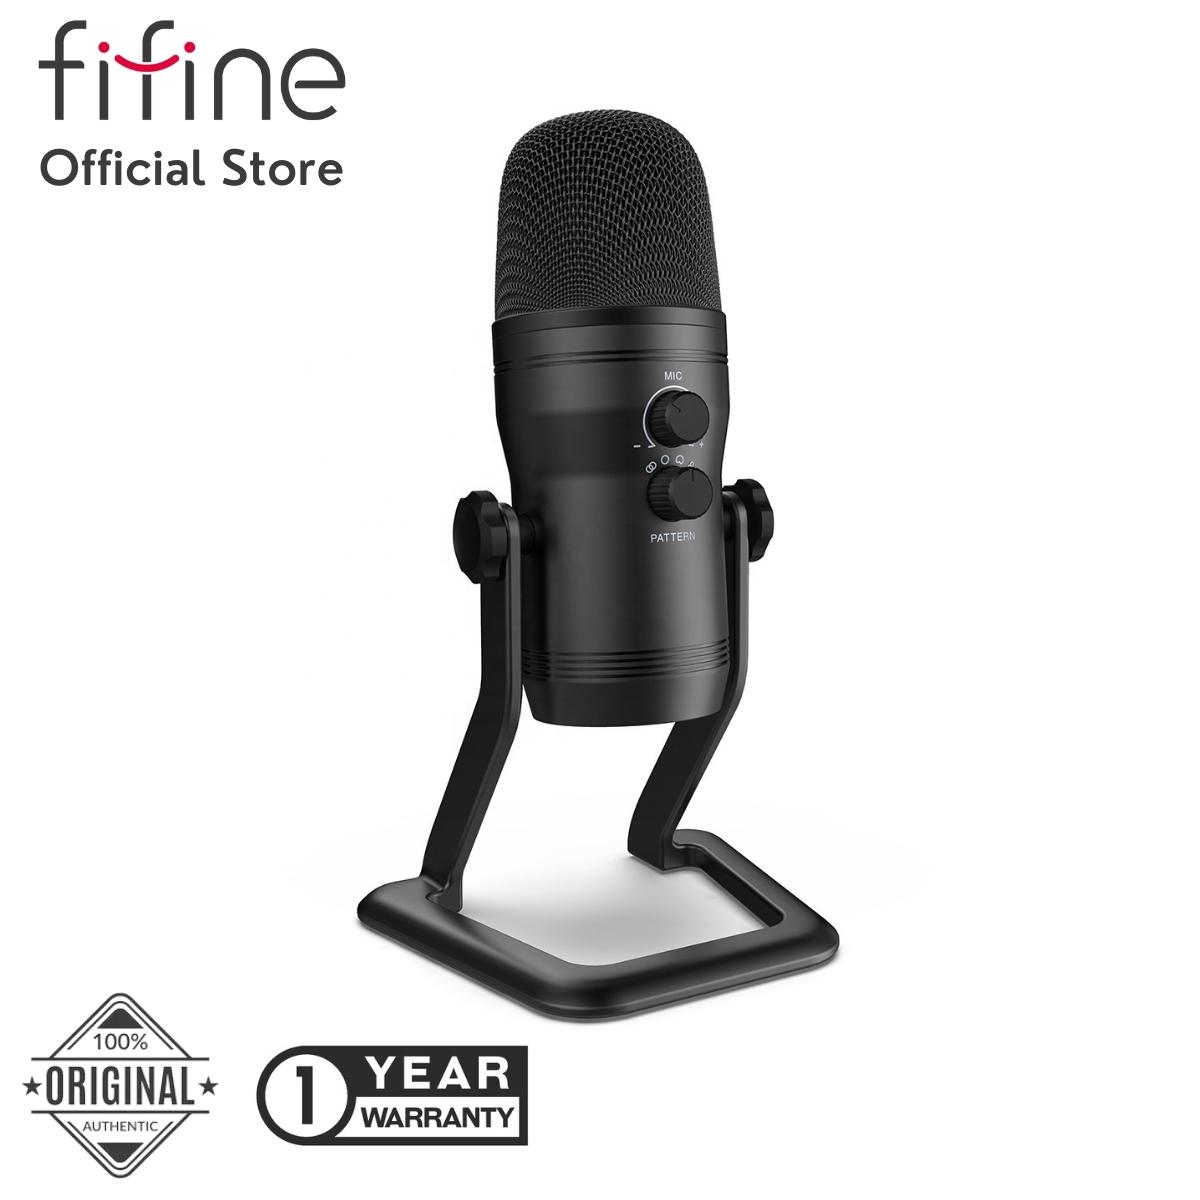 Streaming Professional Studio MIC for Gaming Bracket Kit and Mic KaboChuanmei USB Microphone for PC Laptop MAC Windows and iPhone Android with Reverb and Headphone Monitoring Recording Vocals 